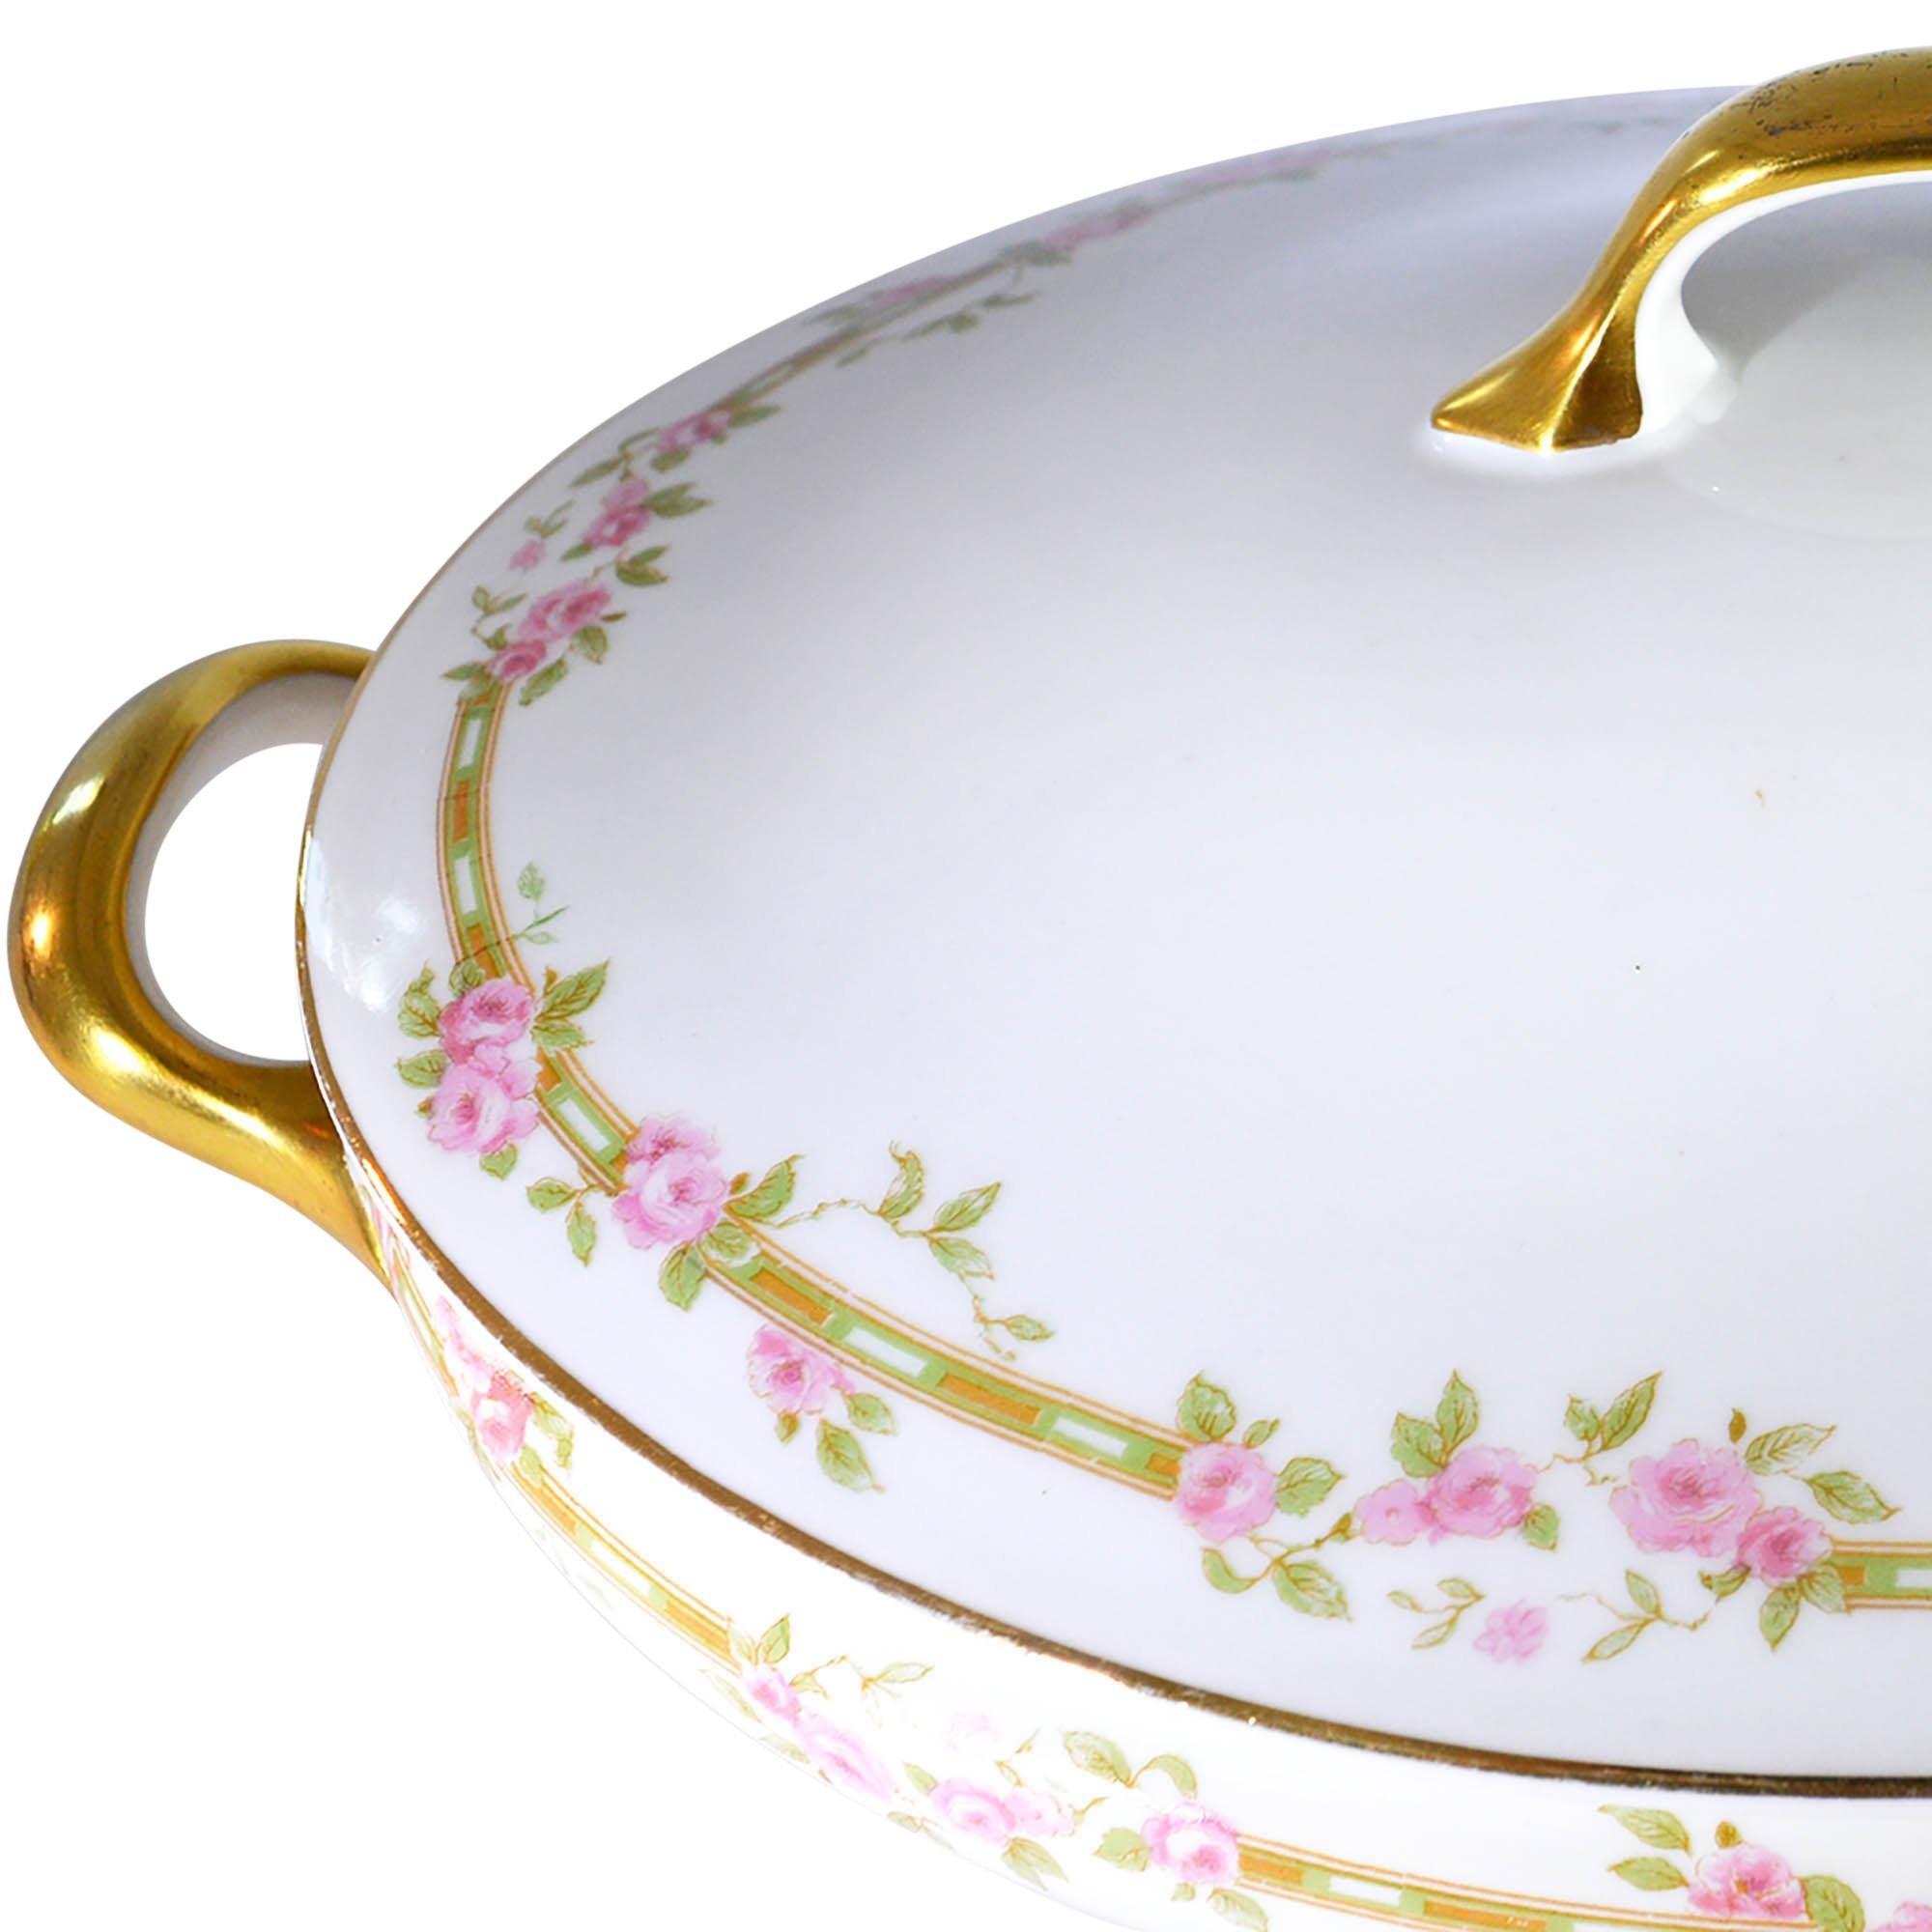 White lidded serving dish with delicate rose accents and glimmering gold handles. This serving dish is sure to make any meal feel special.